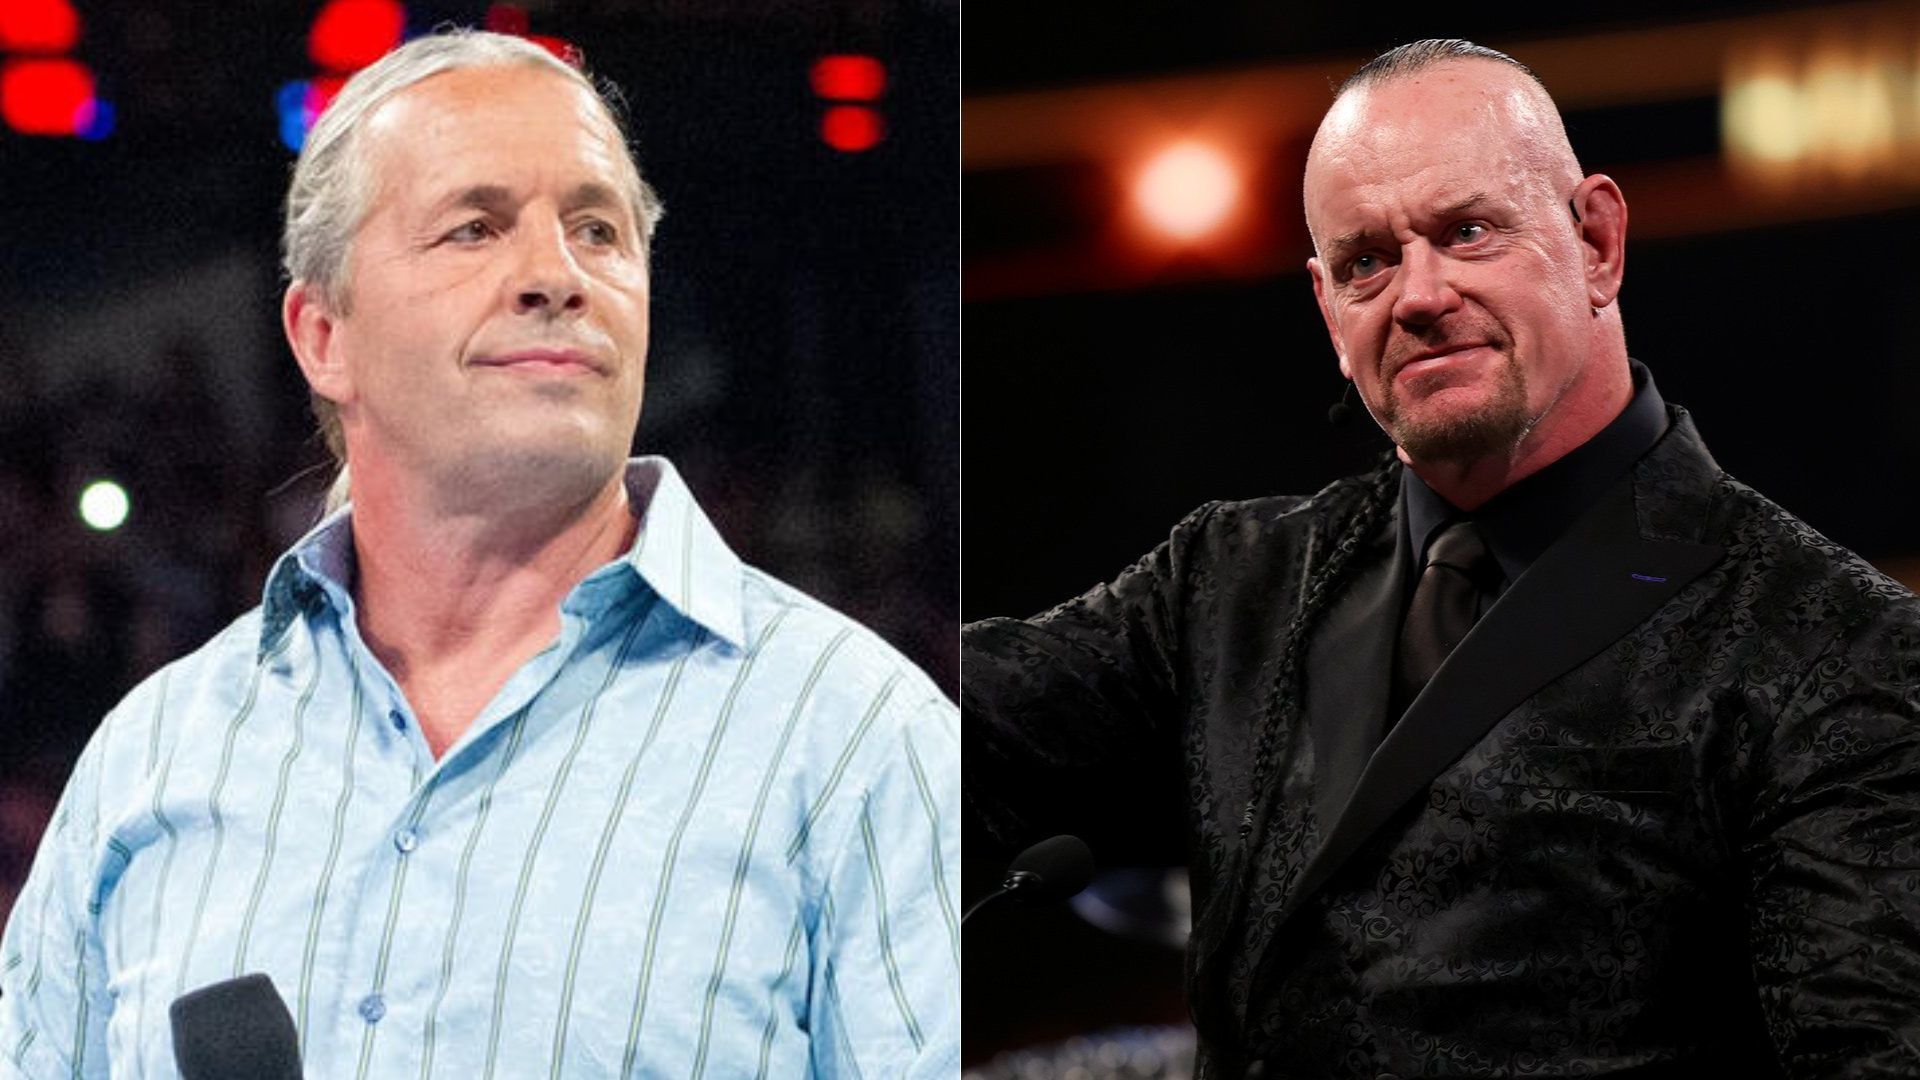 Bret Hart (left) and The Undertaker (right) [Image Credit: wwe.com]